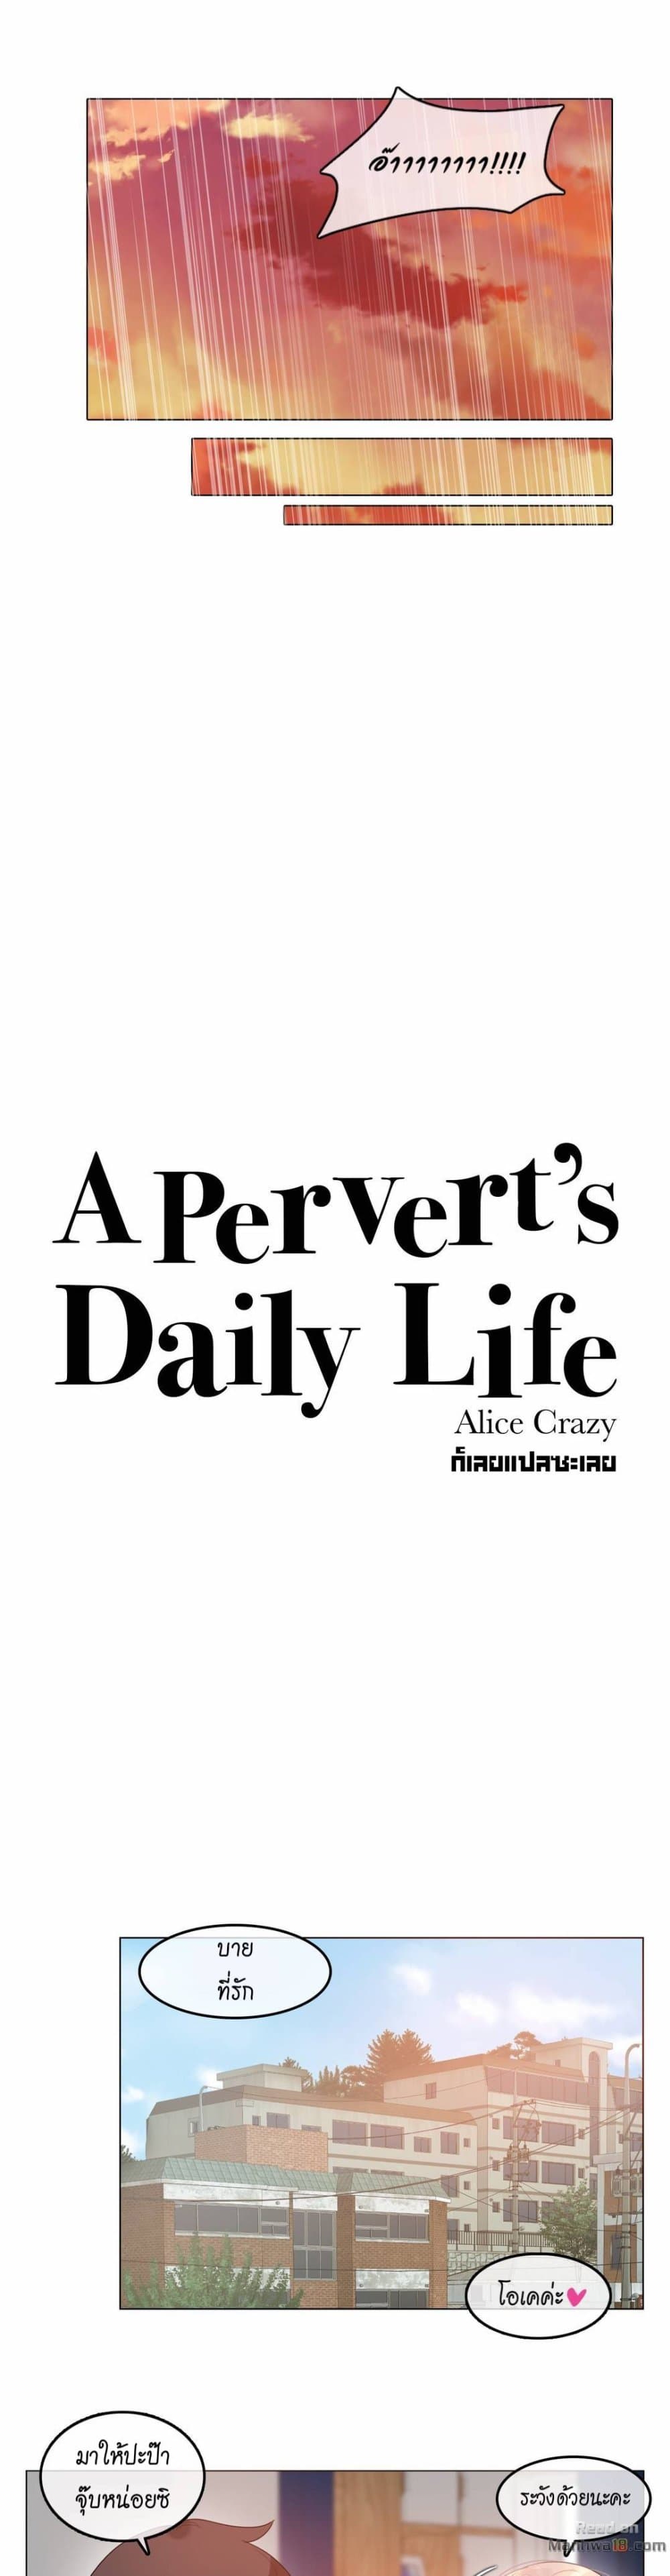 A Pervert's Daily Life 68-68